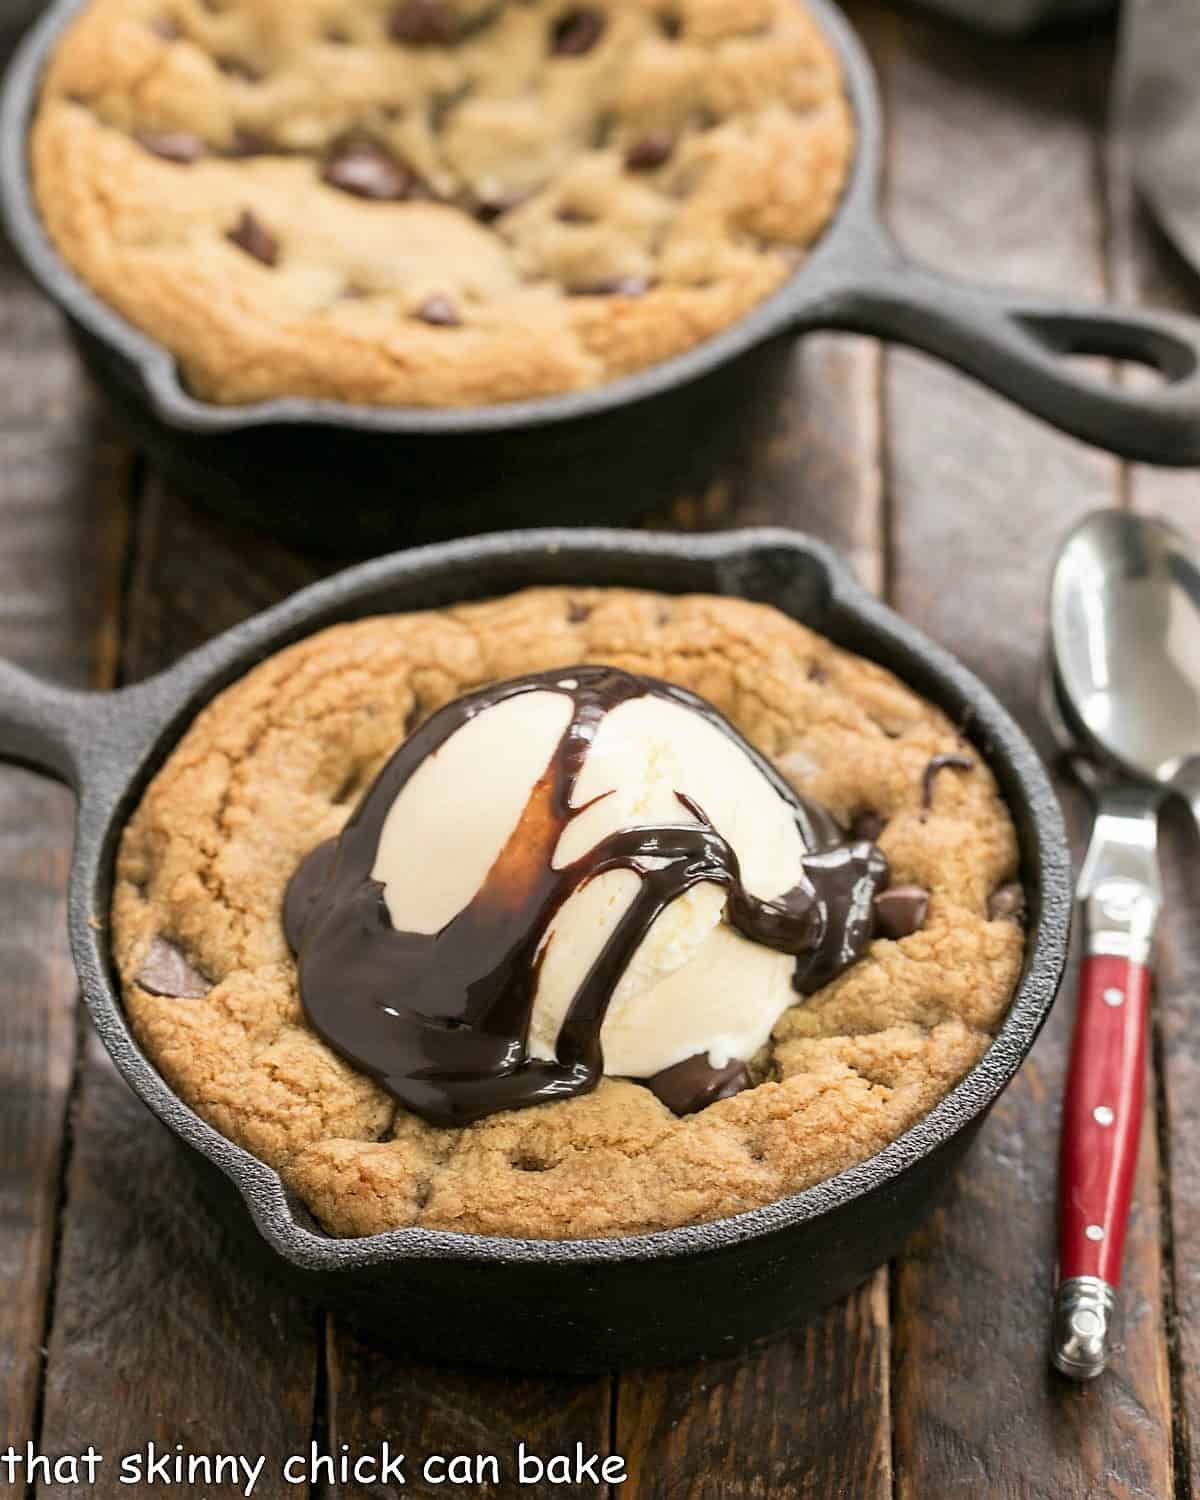 Big pizza cookiesa cast iron skillets with one topped with ice cream.